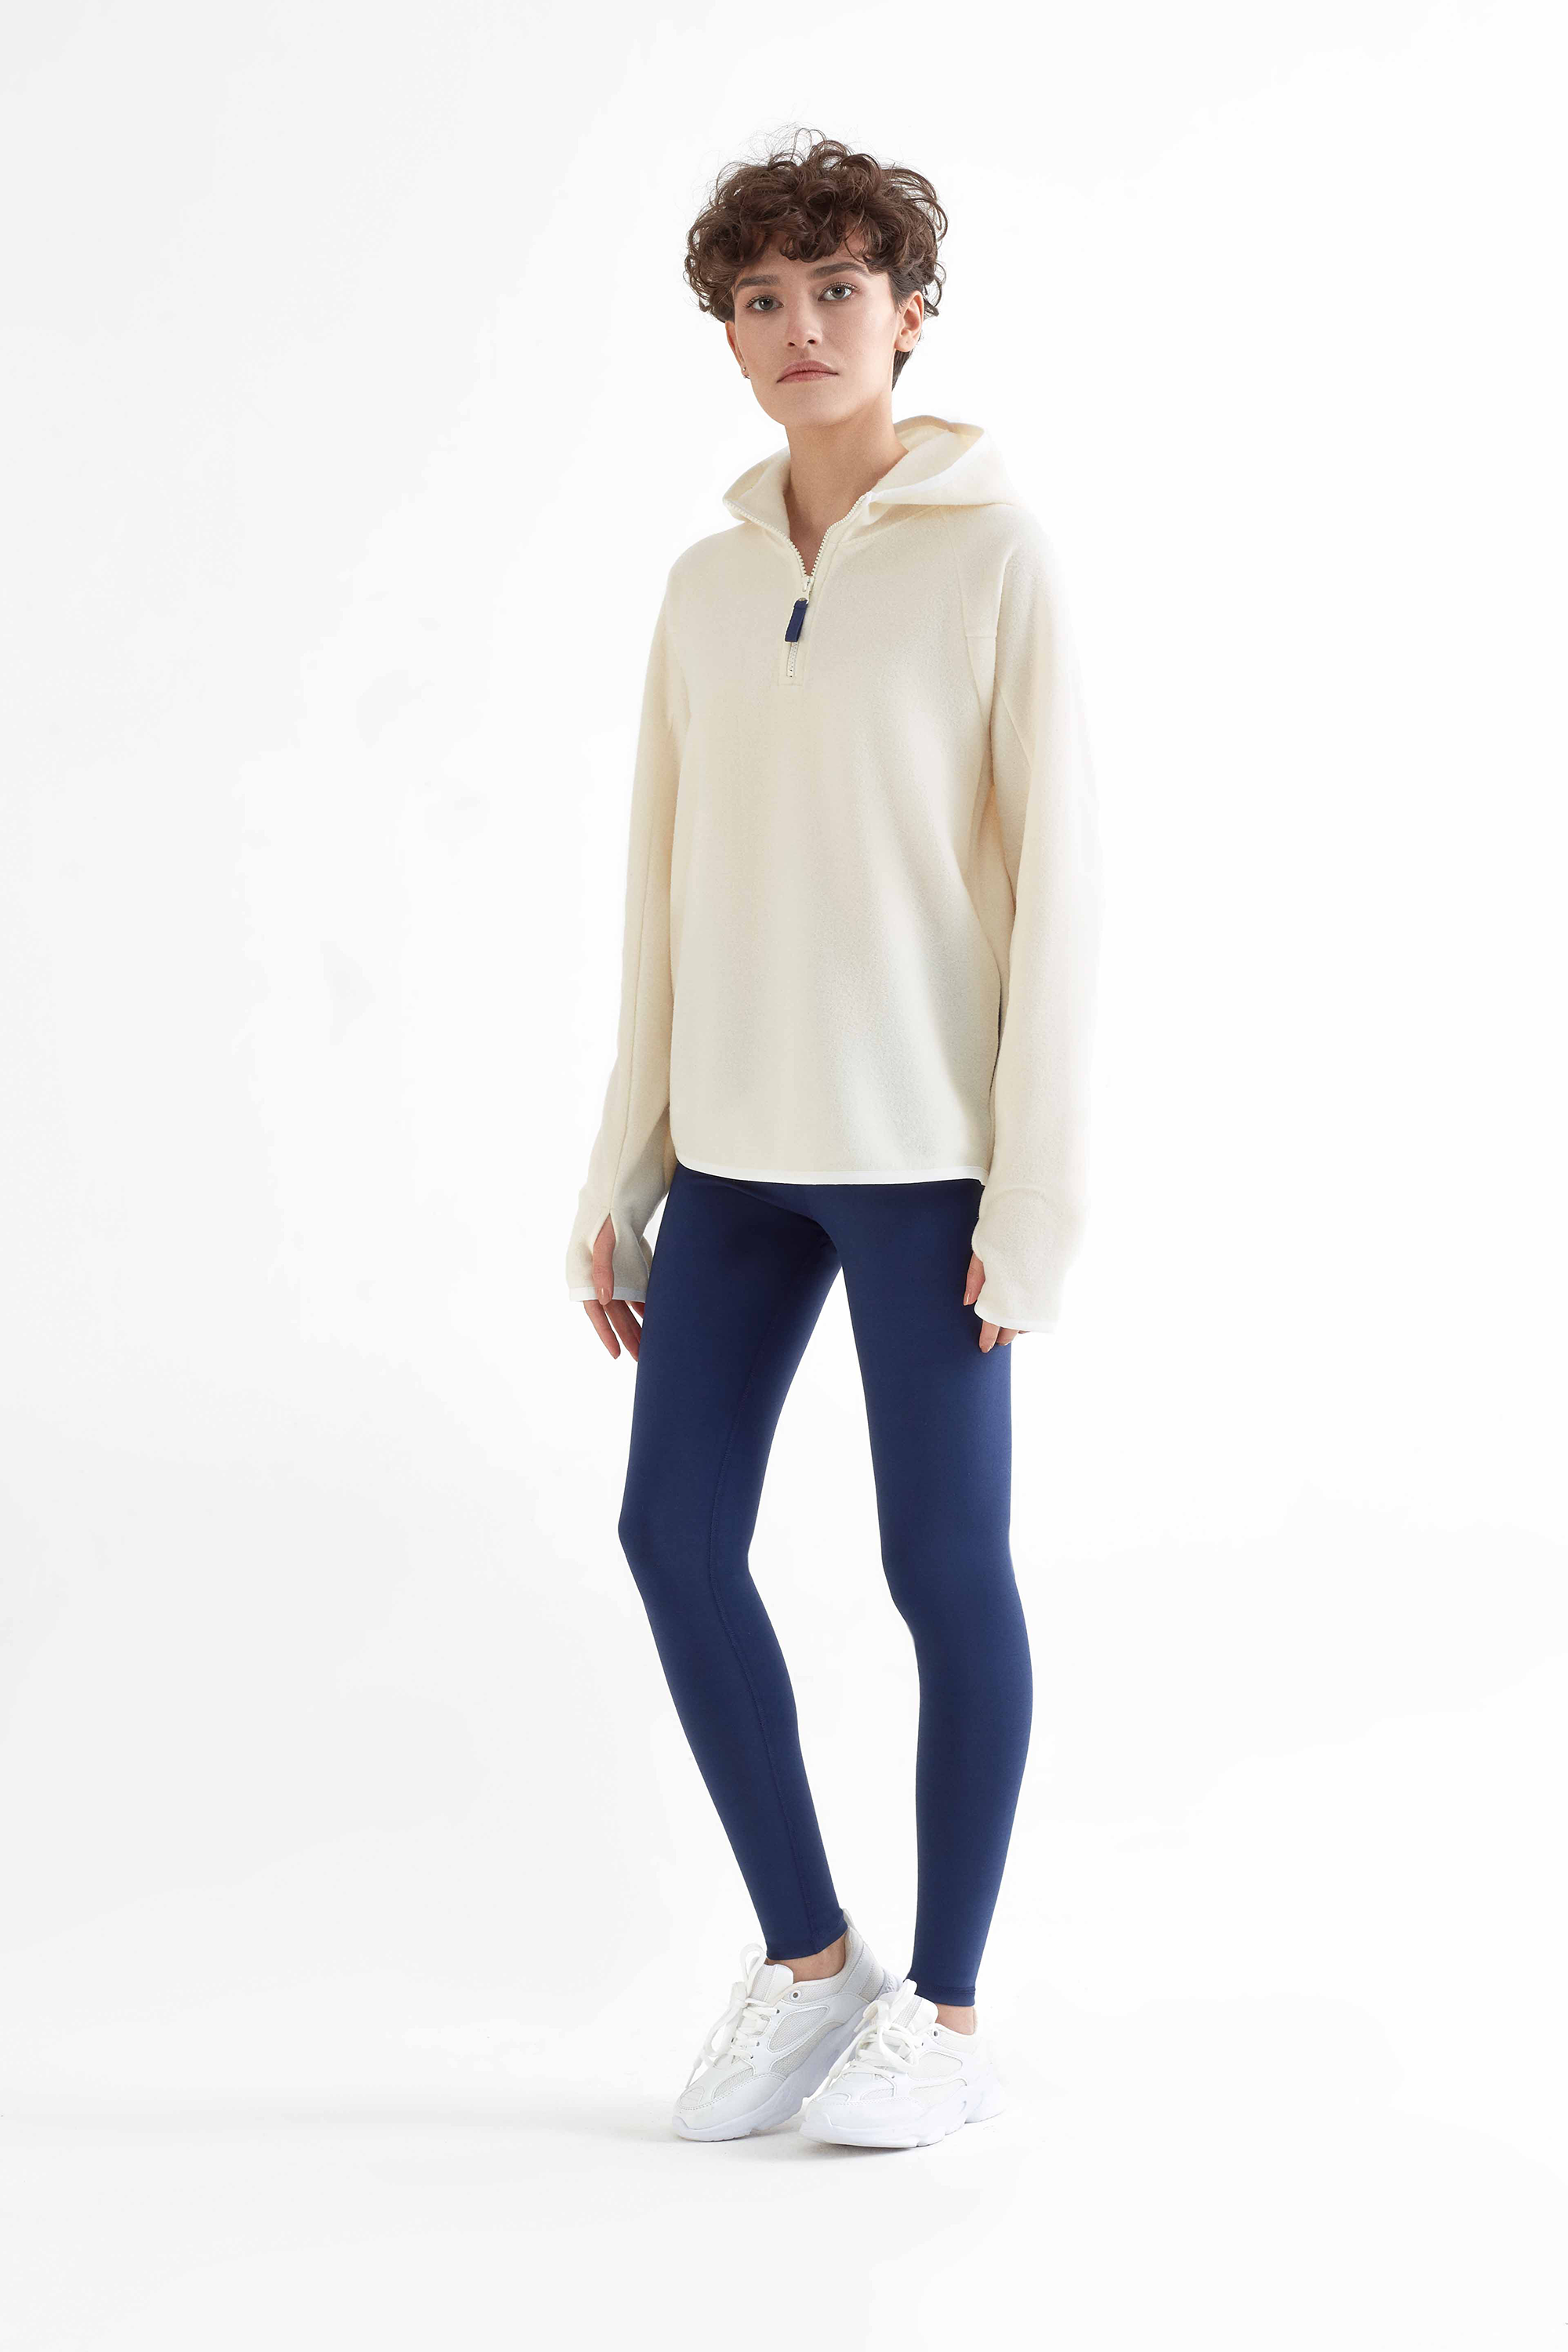 Organic Yoga Leggings by True North - French Navy - This Is Anyo